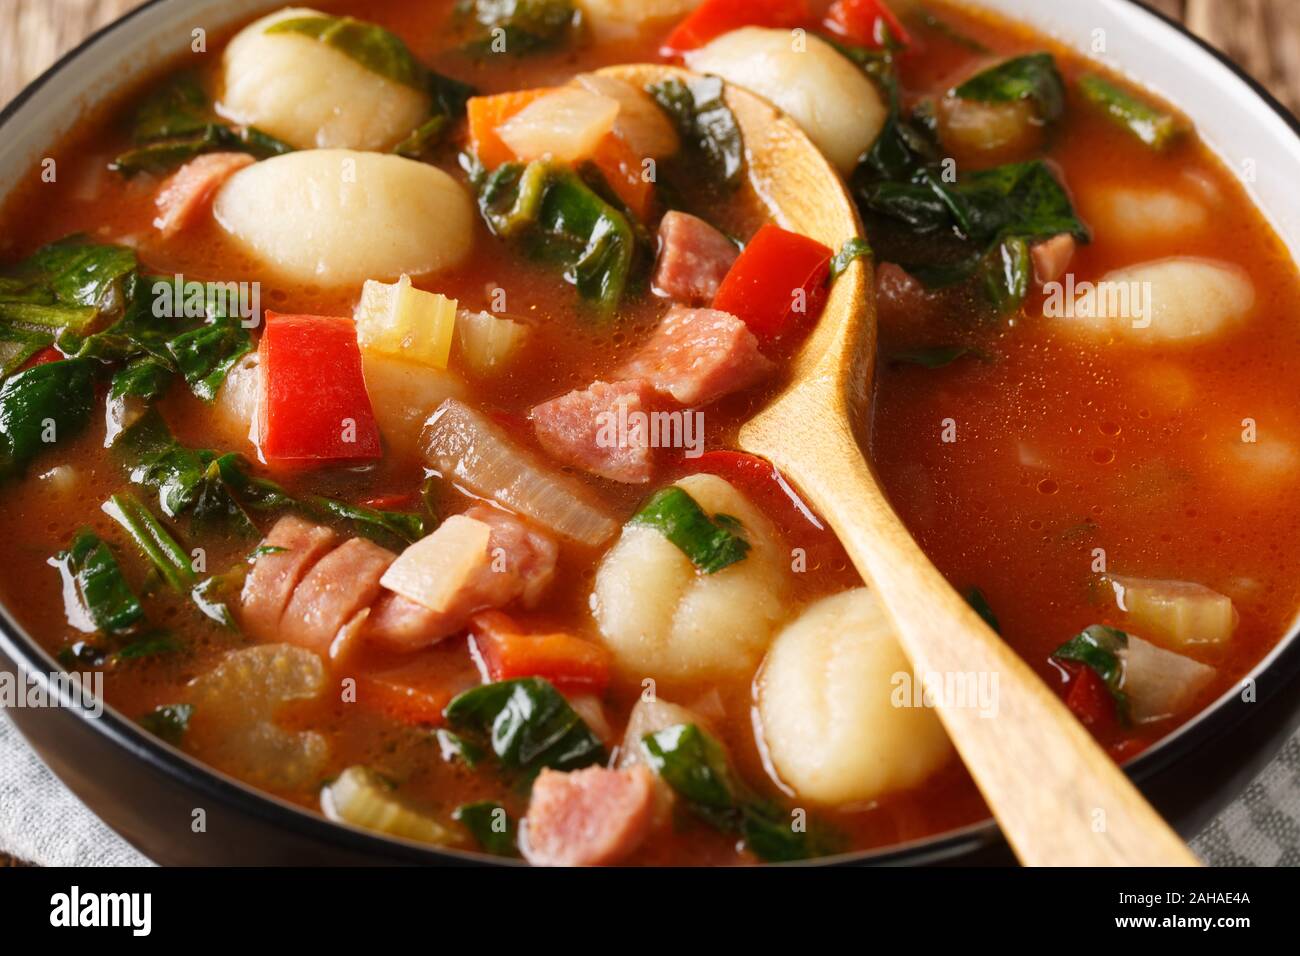 Tuscan tomato soup with gnocchi, Italian sausages and vegetables close-up in a bowl on the table. horizontal Stock Photo